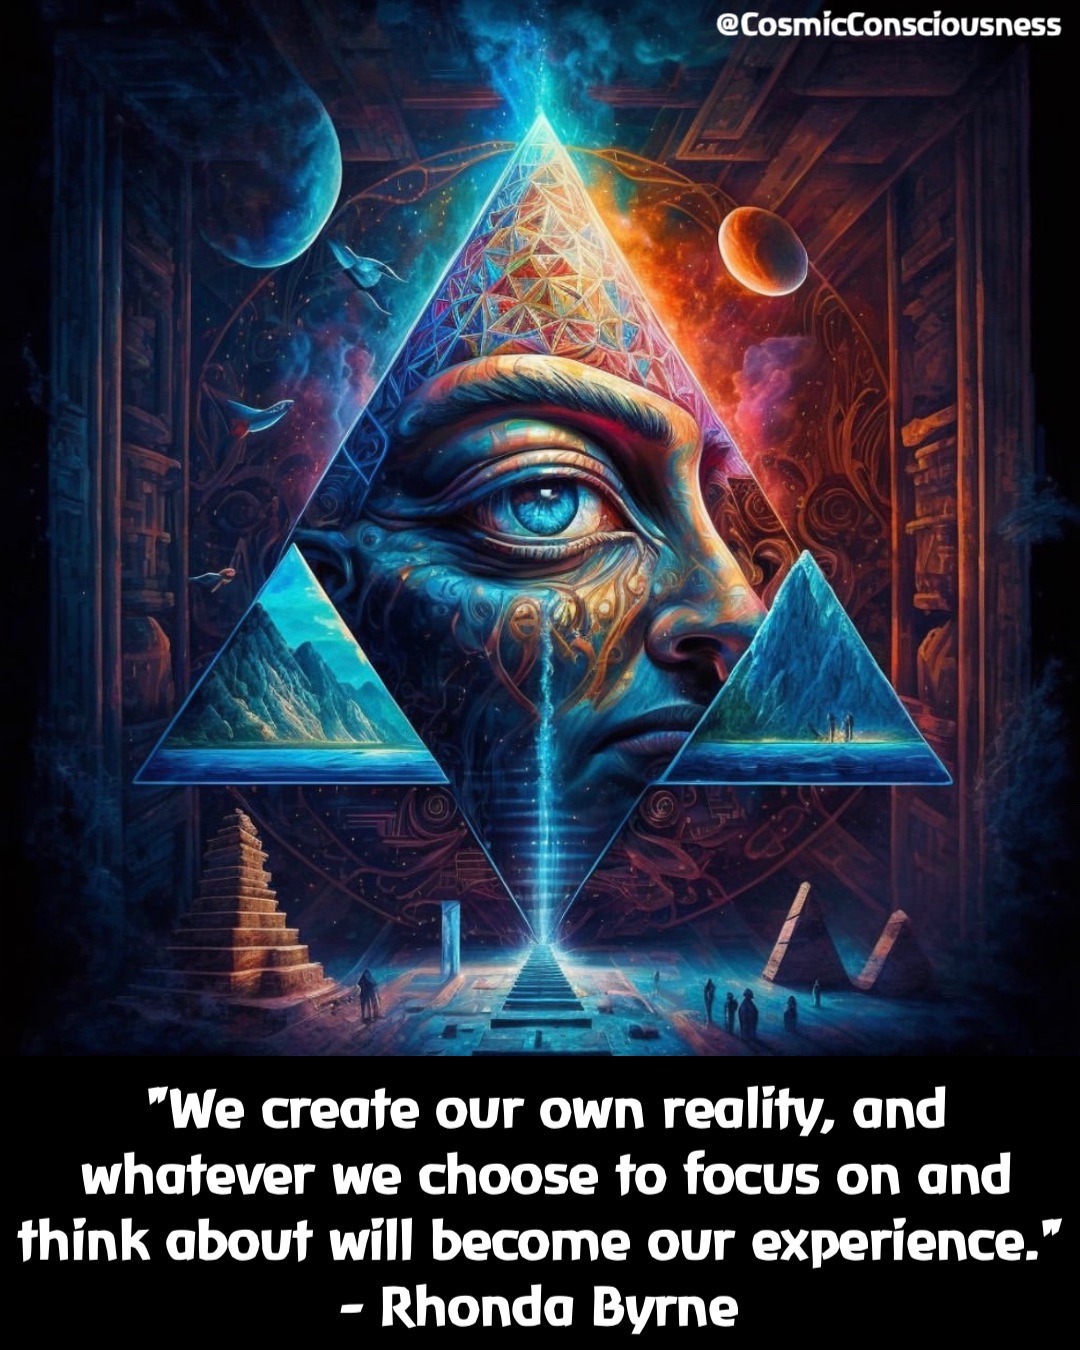 "We create our own reality, and whatever we choose to focus on and think about will become our experience." 
- Rhonda Byrne @CosmicConsciousness